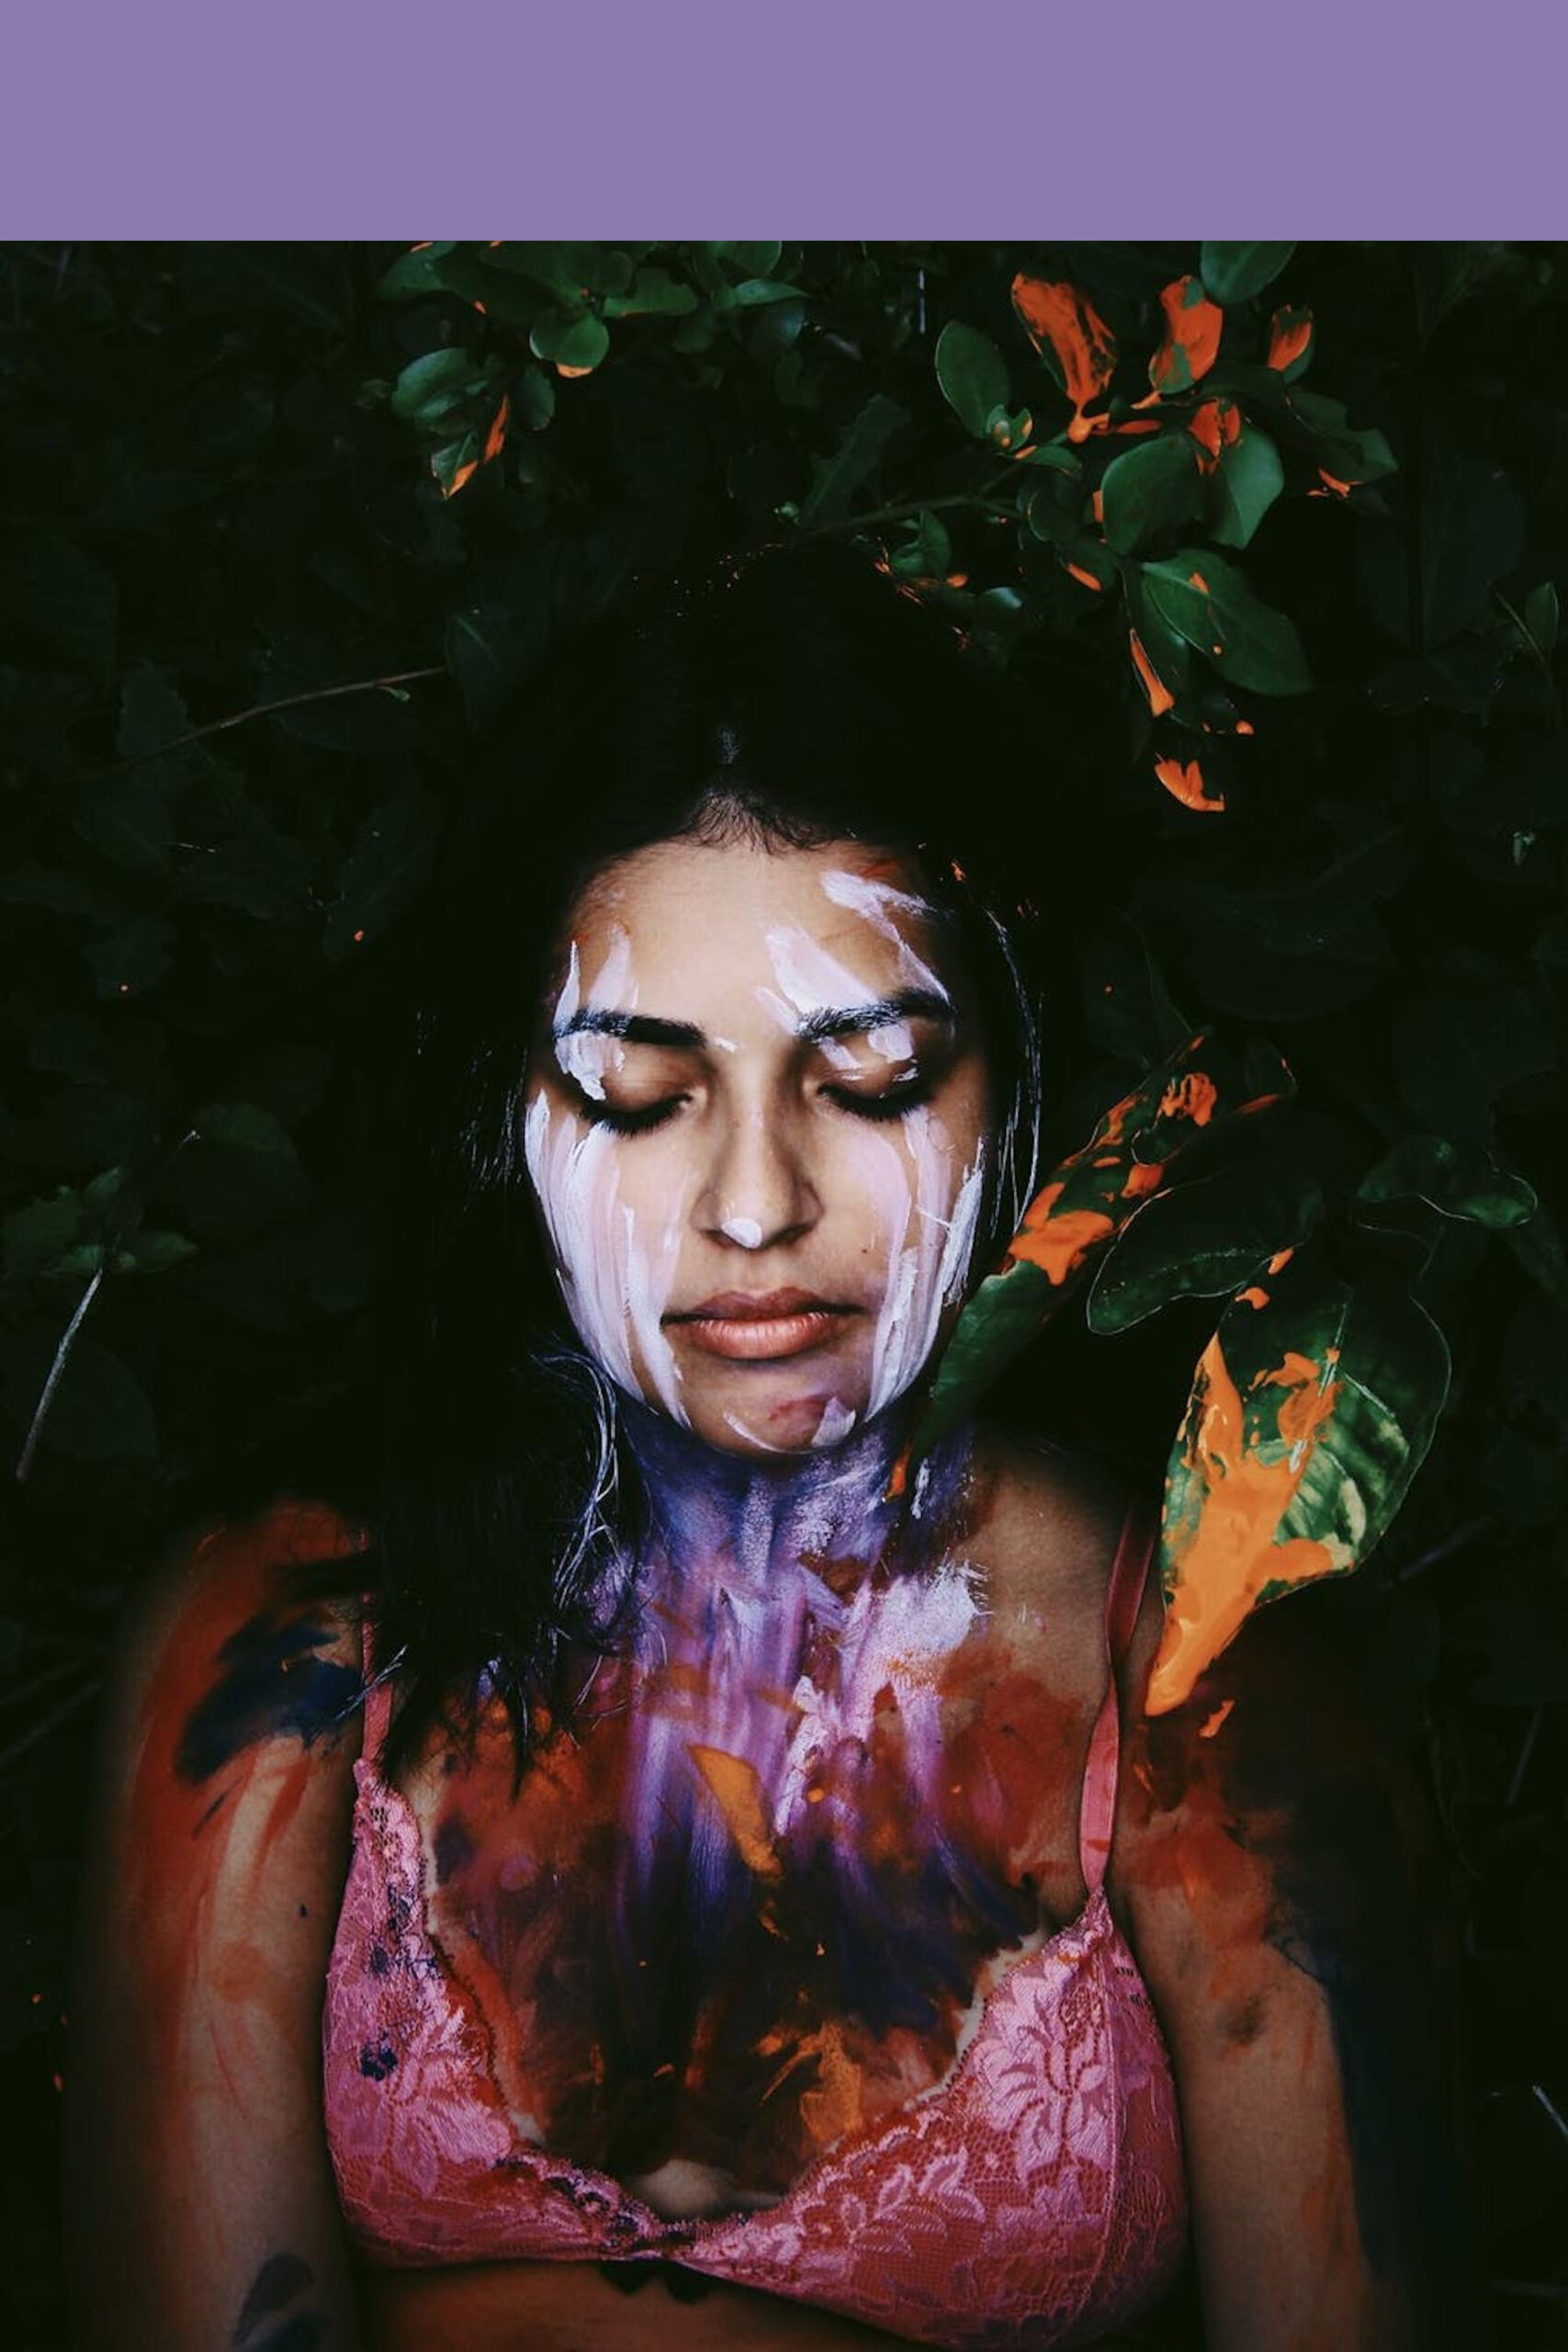 A meditative woman with paint on her body surrounded by plant leaves